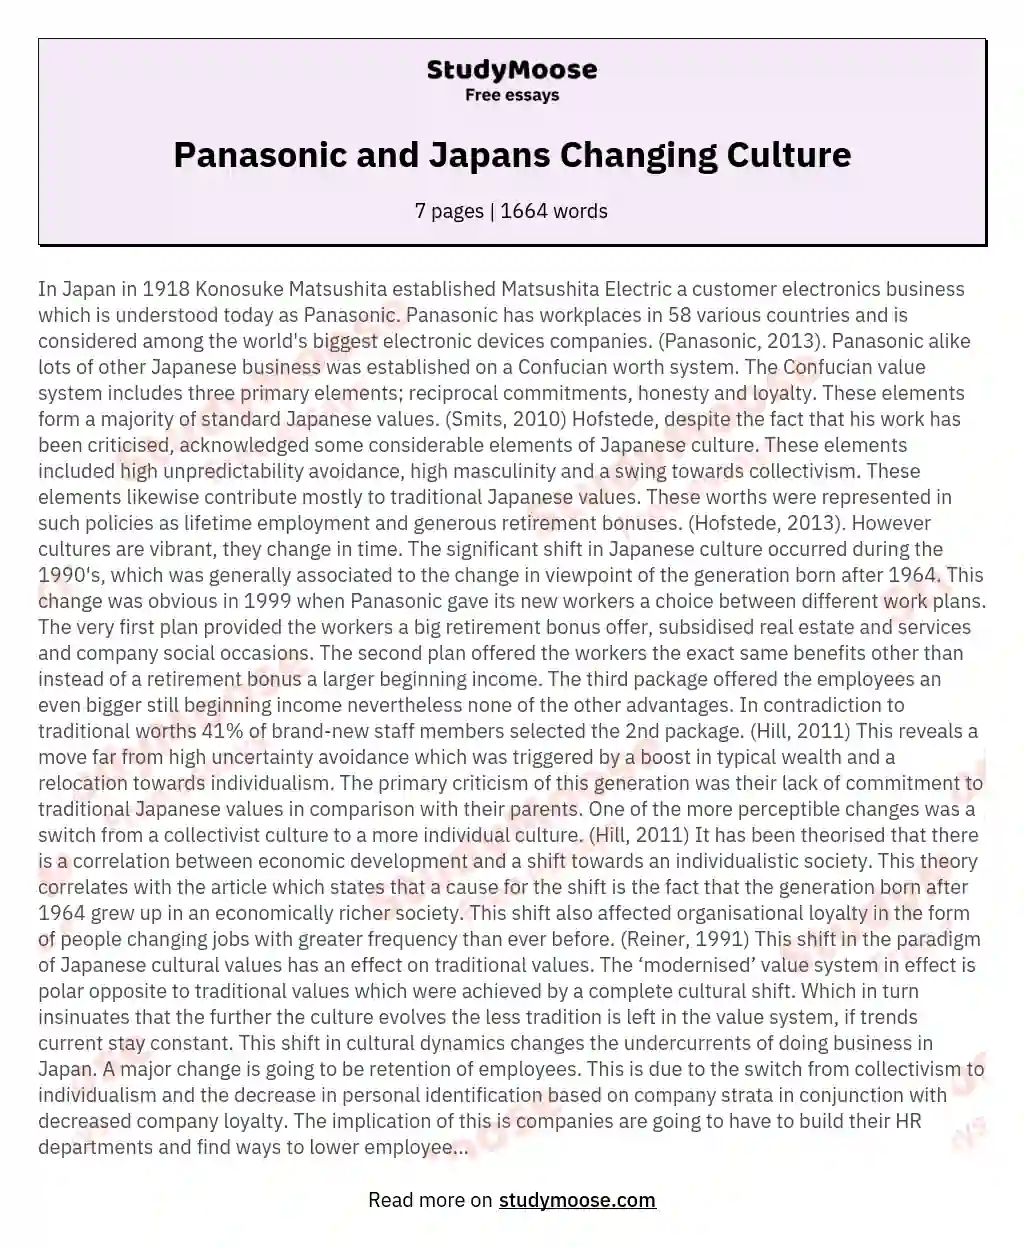 Panasonic and Japans Changing Culture essay